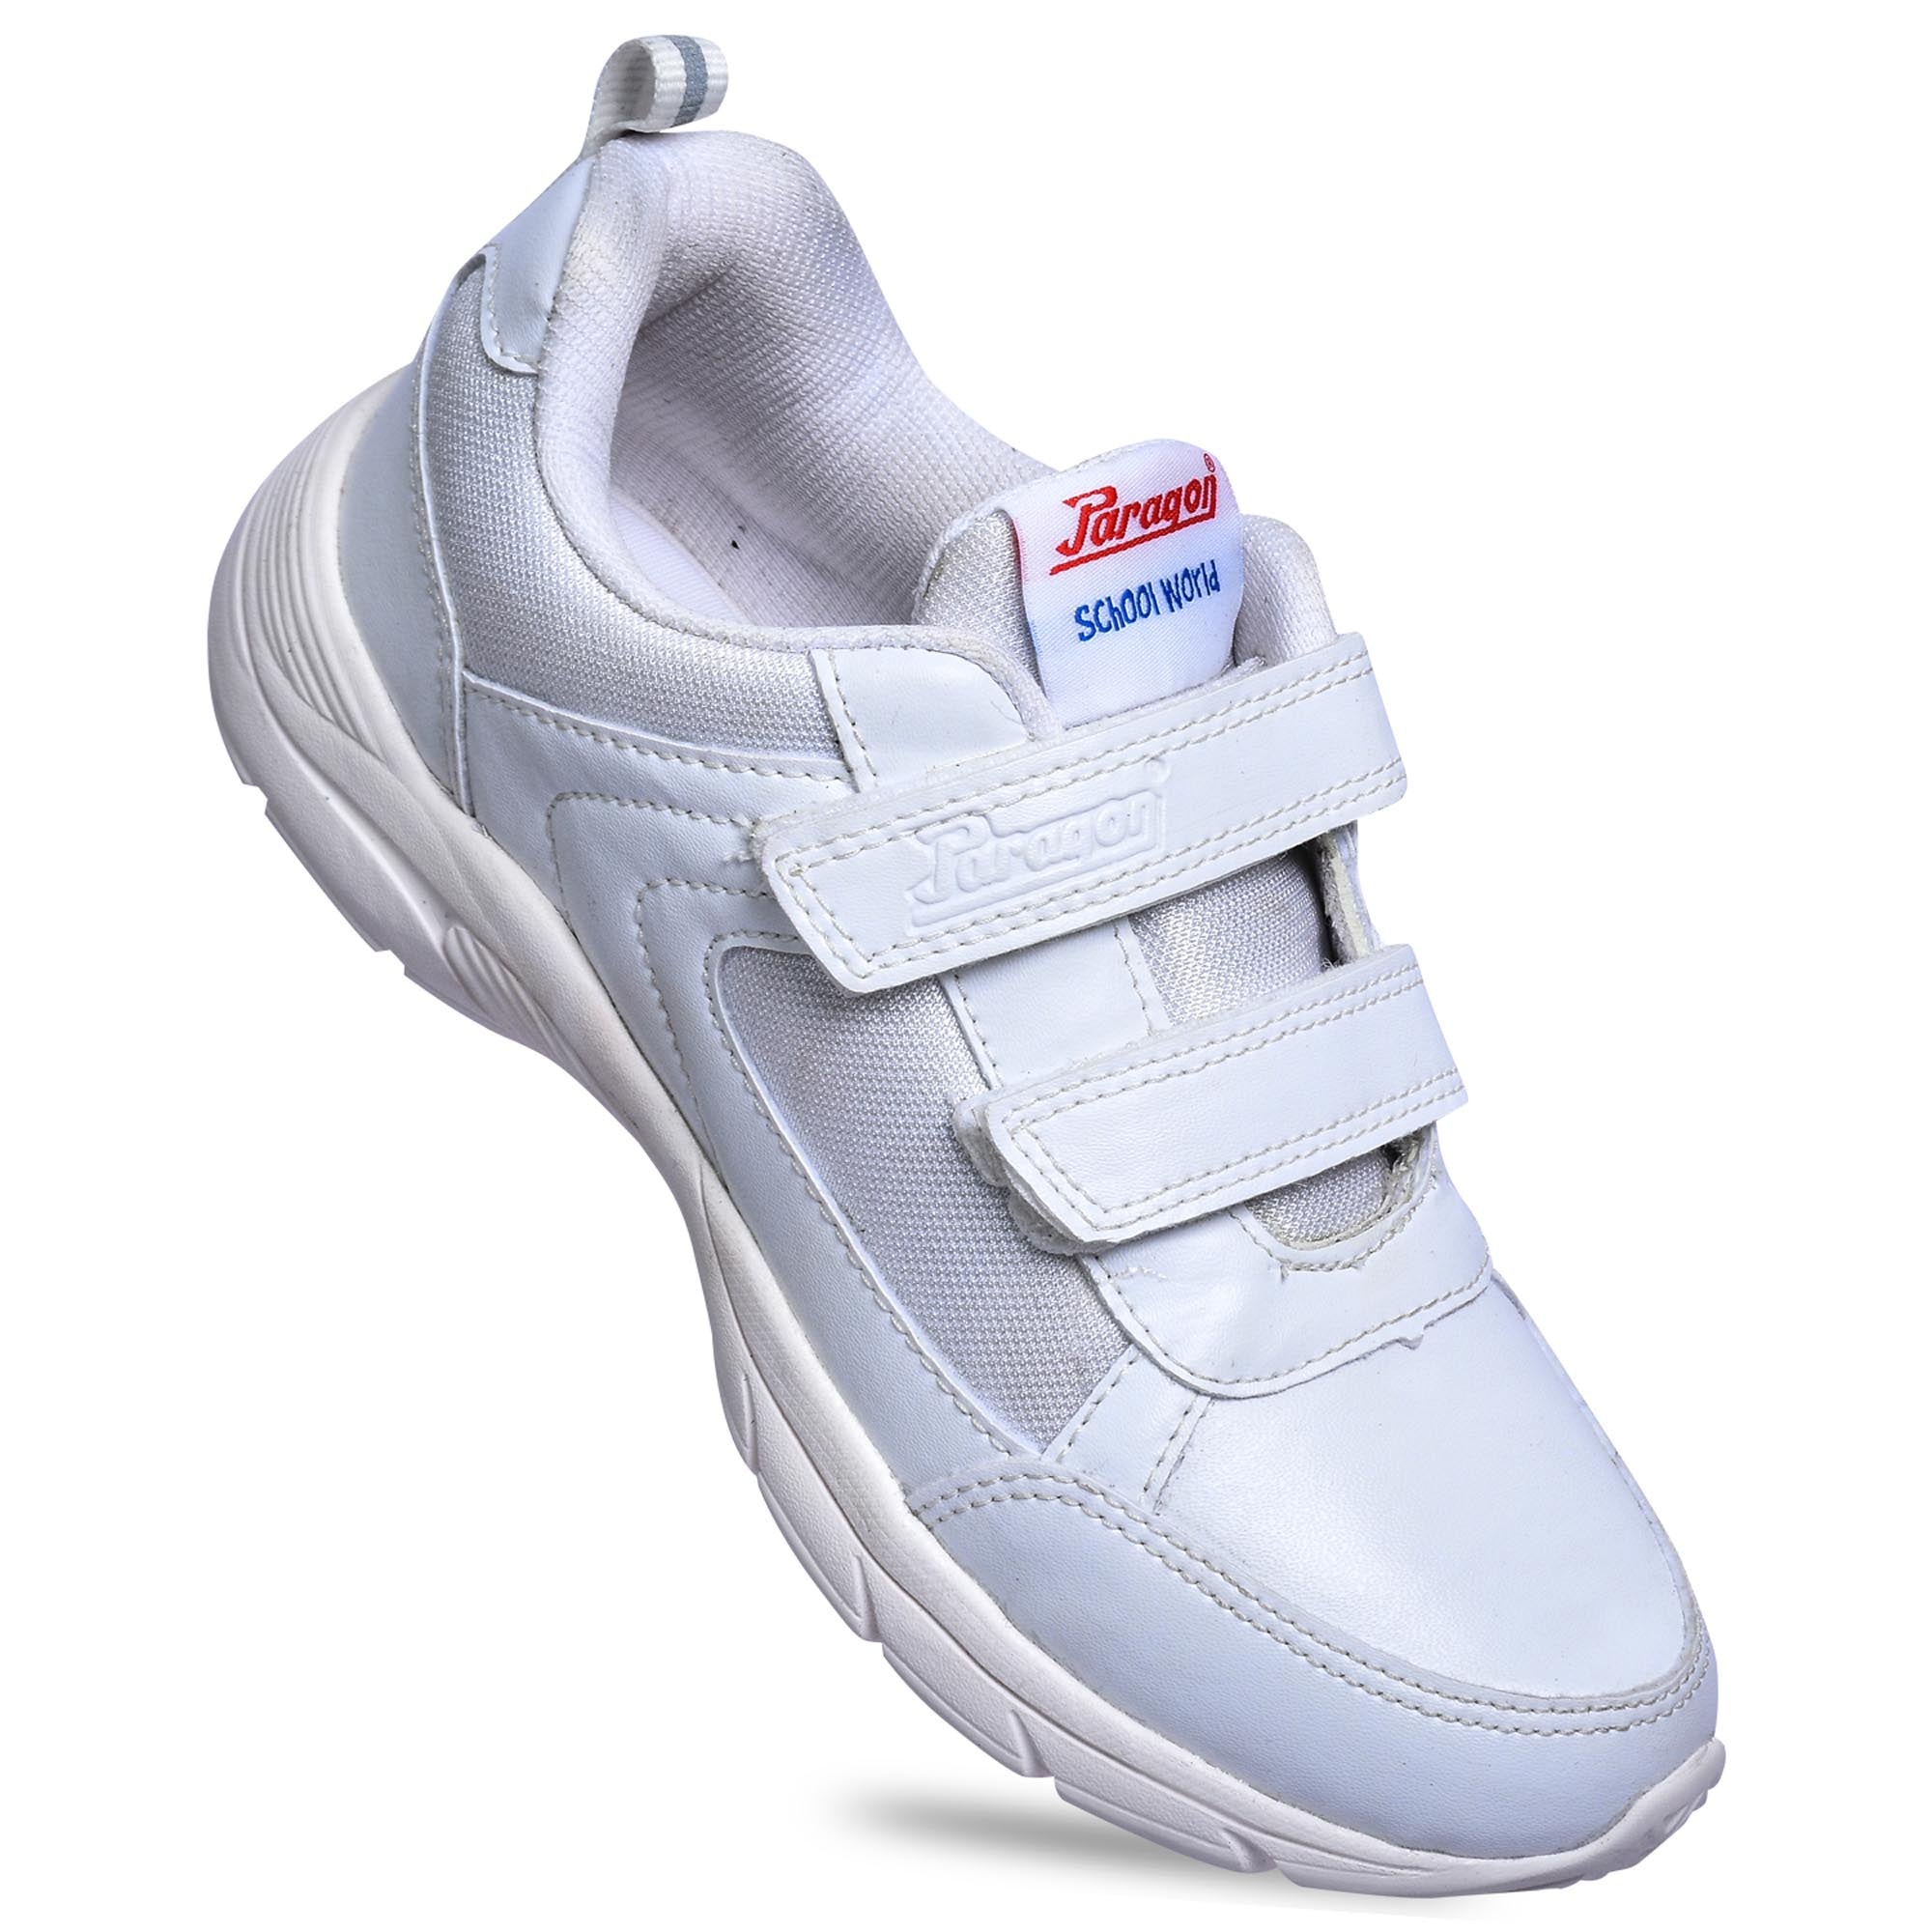 Paragon FBK0774K Kids Boys Girls School Shoes Comfortable Cushioned Soles | Durable | Daily &amp; Occasion wear White